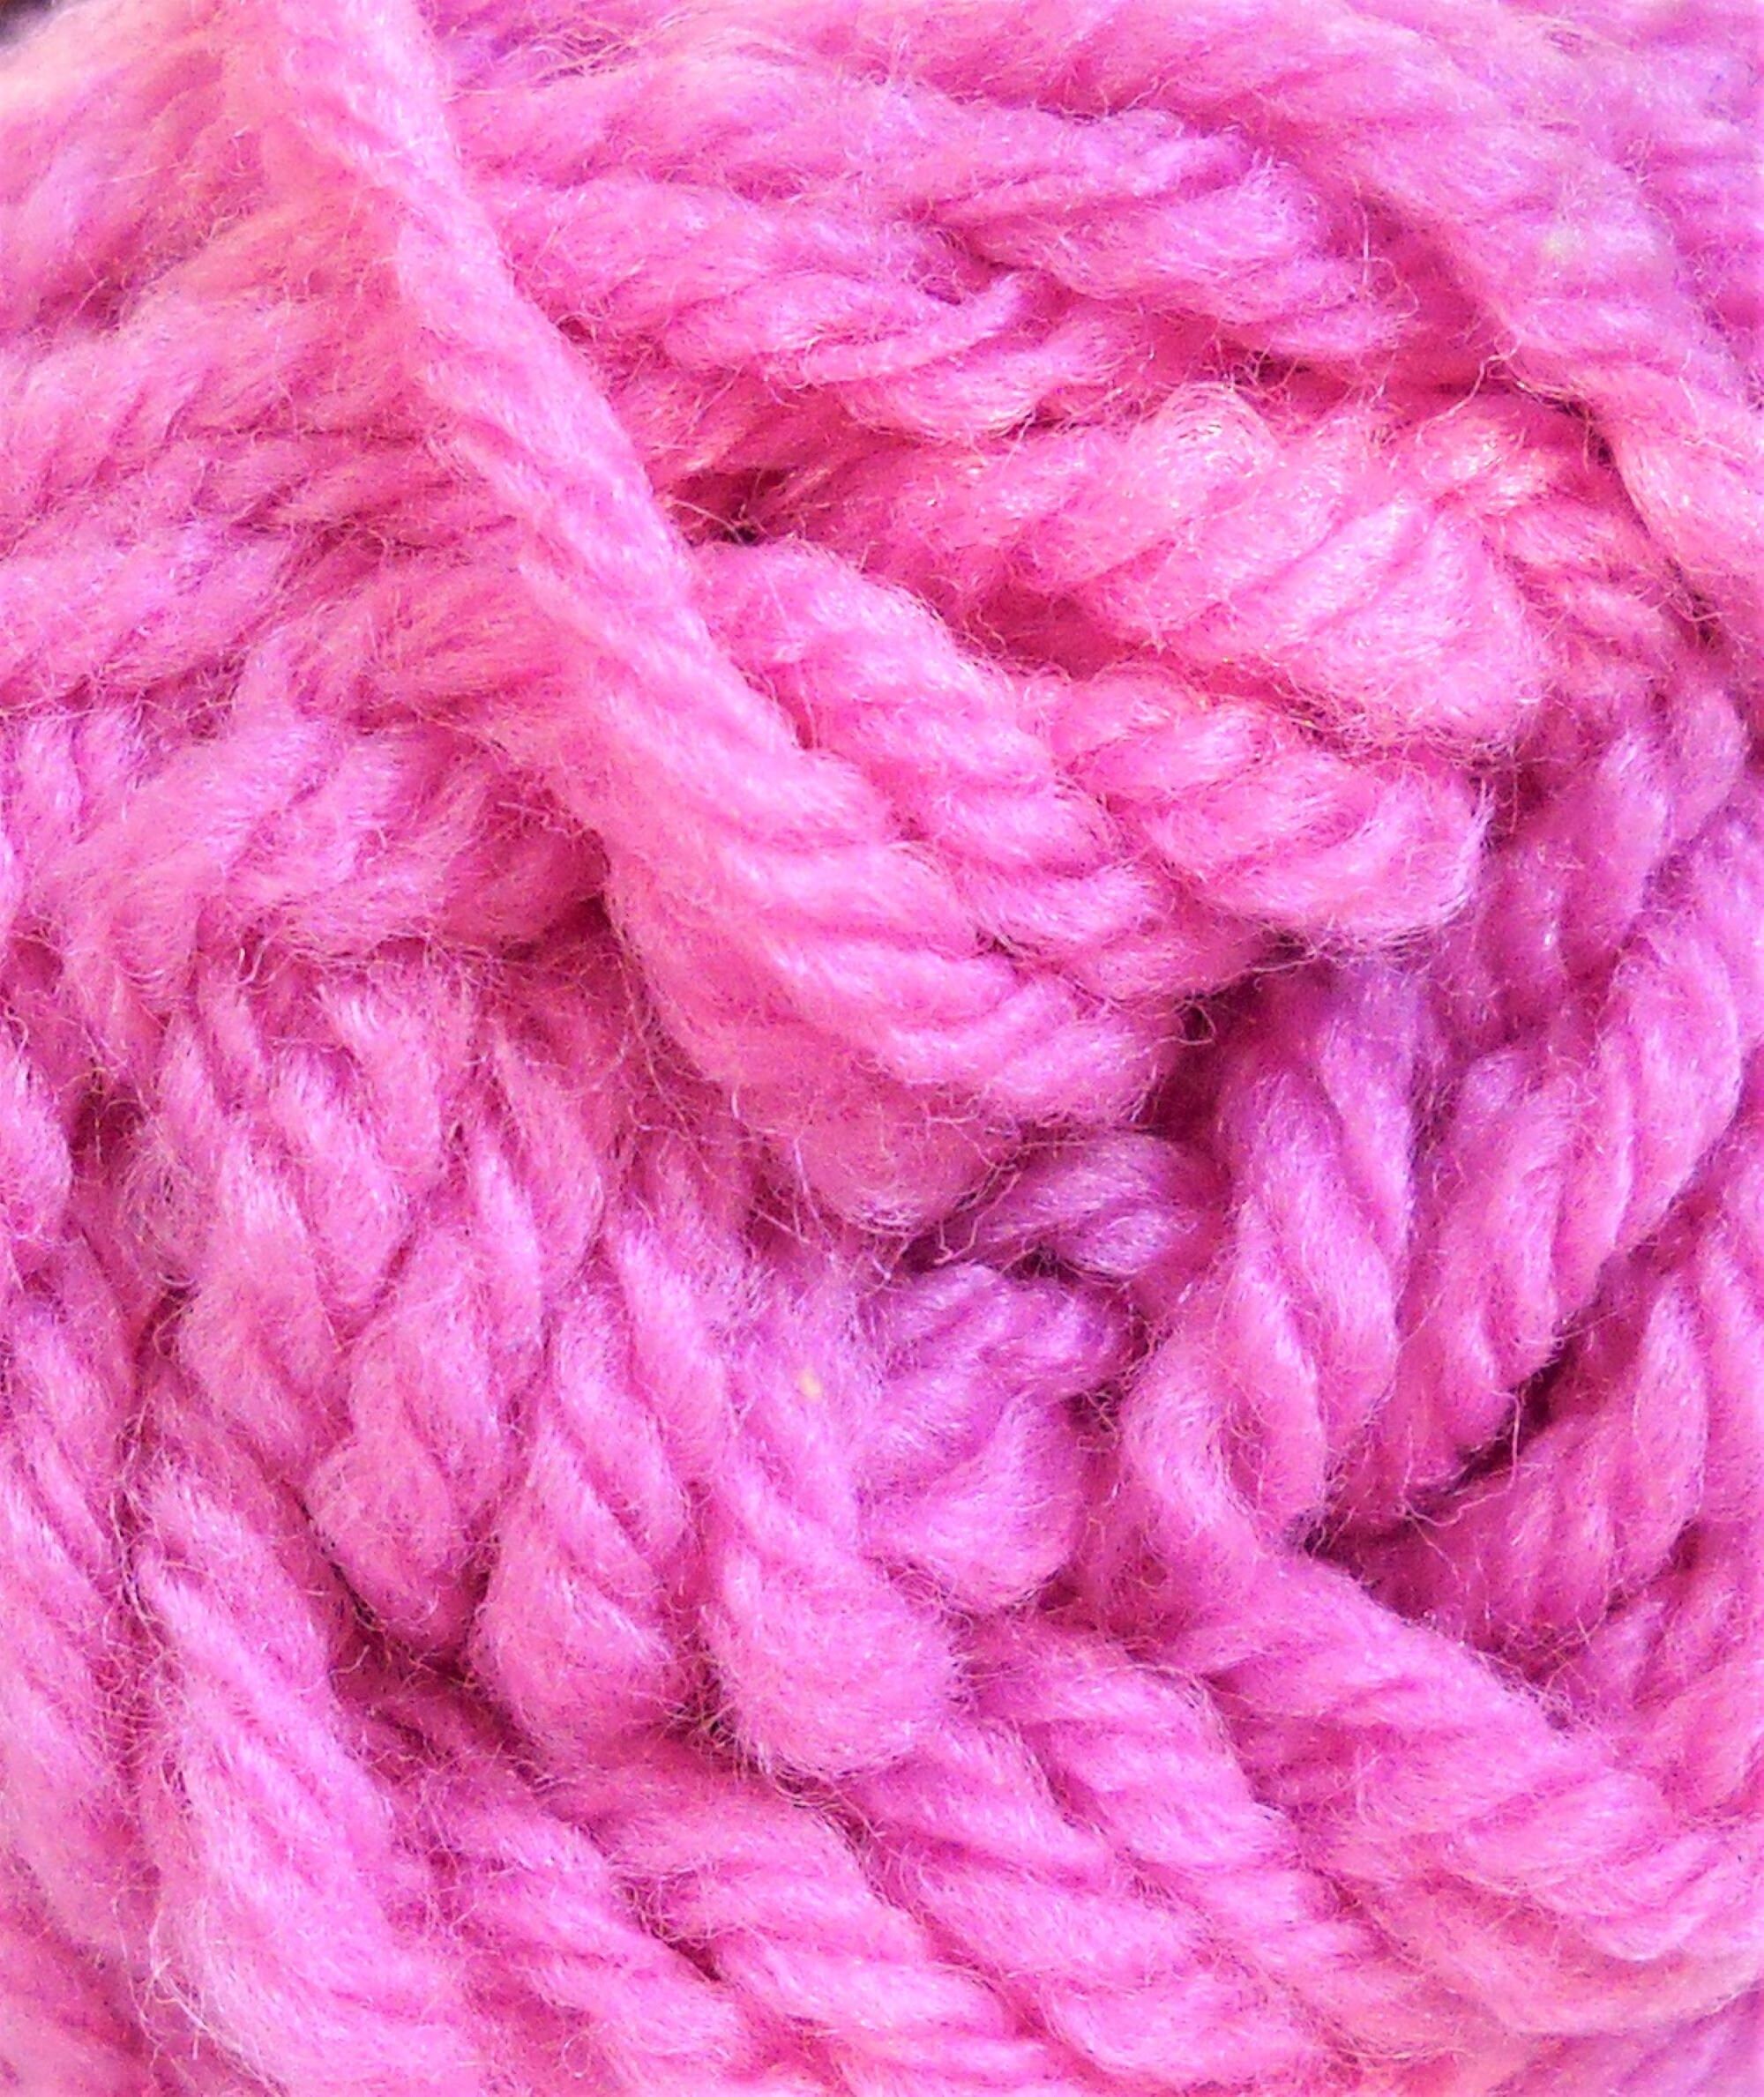 Caron Wintuk Yarn 4 Ply Worsted Weight 3 oz Skein Evening Jewels Ombre 3526 